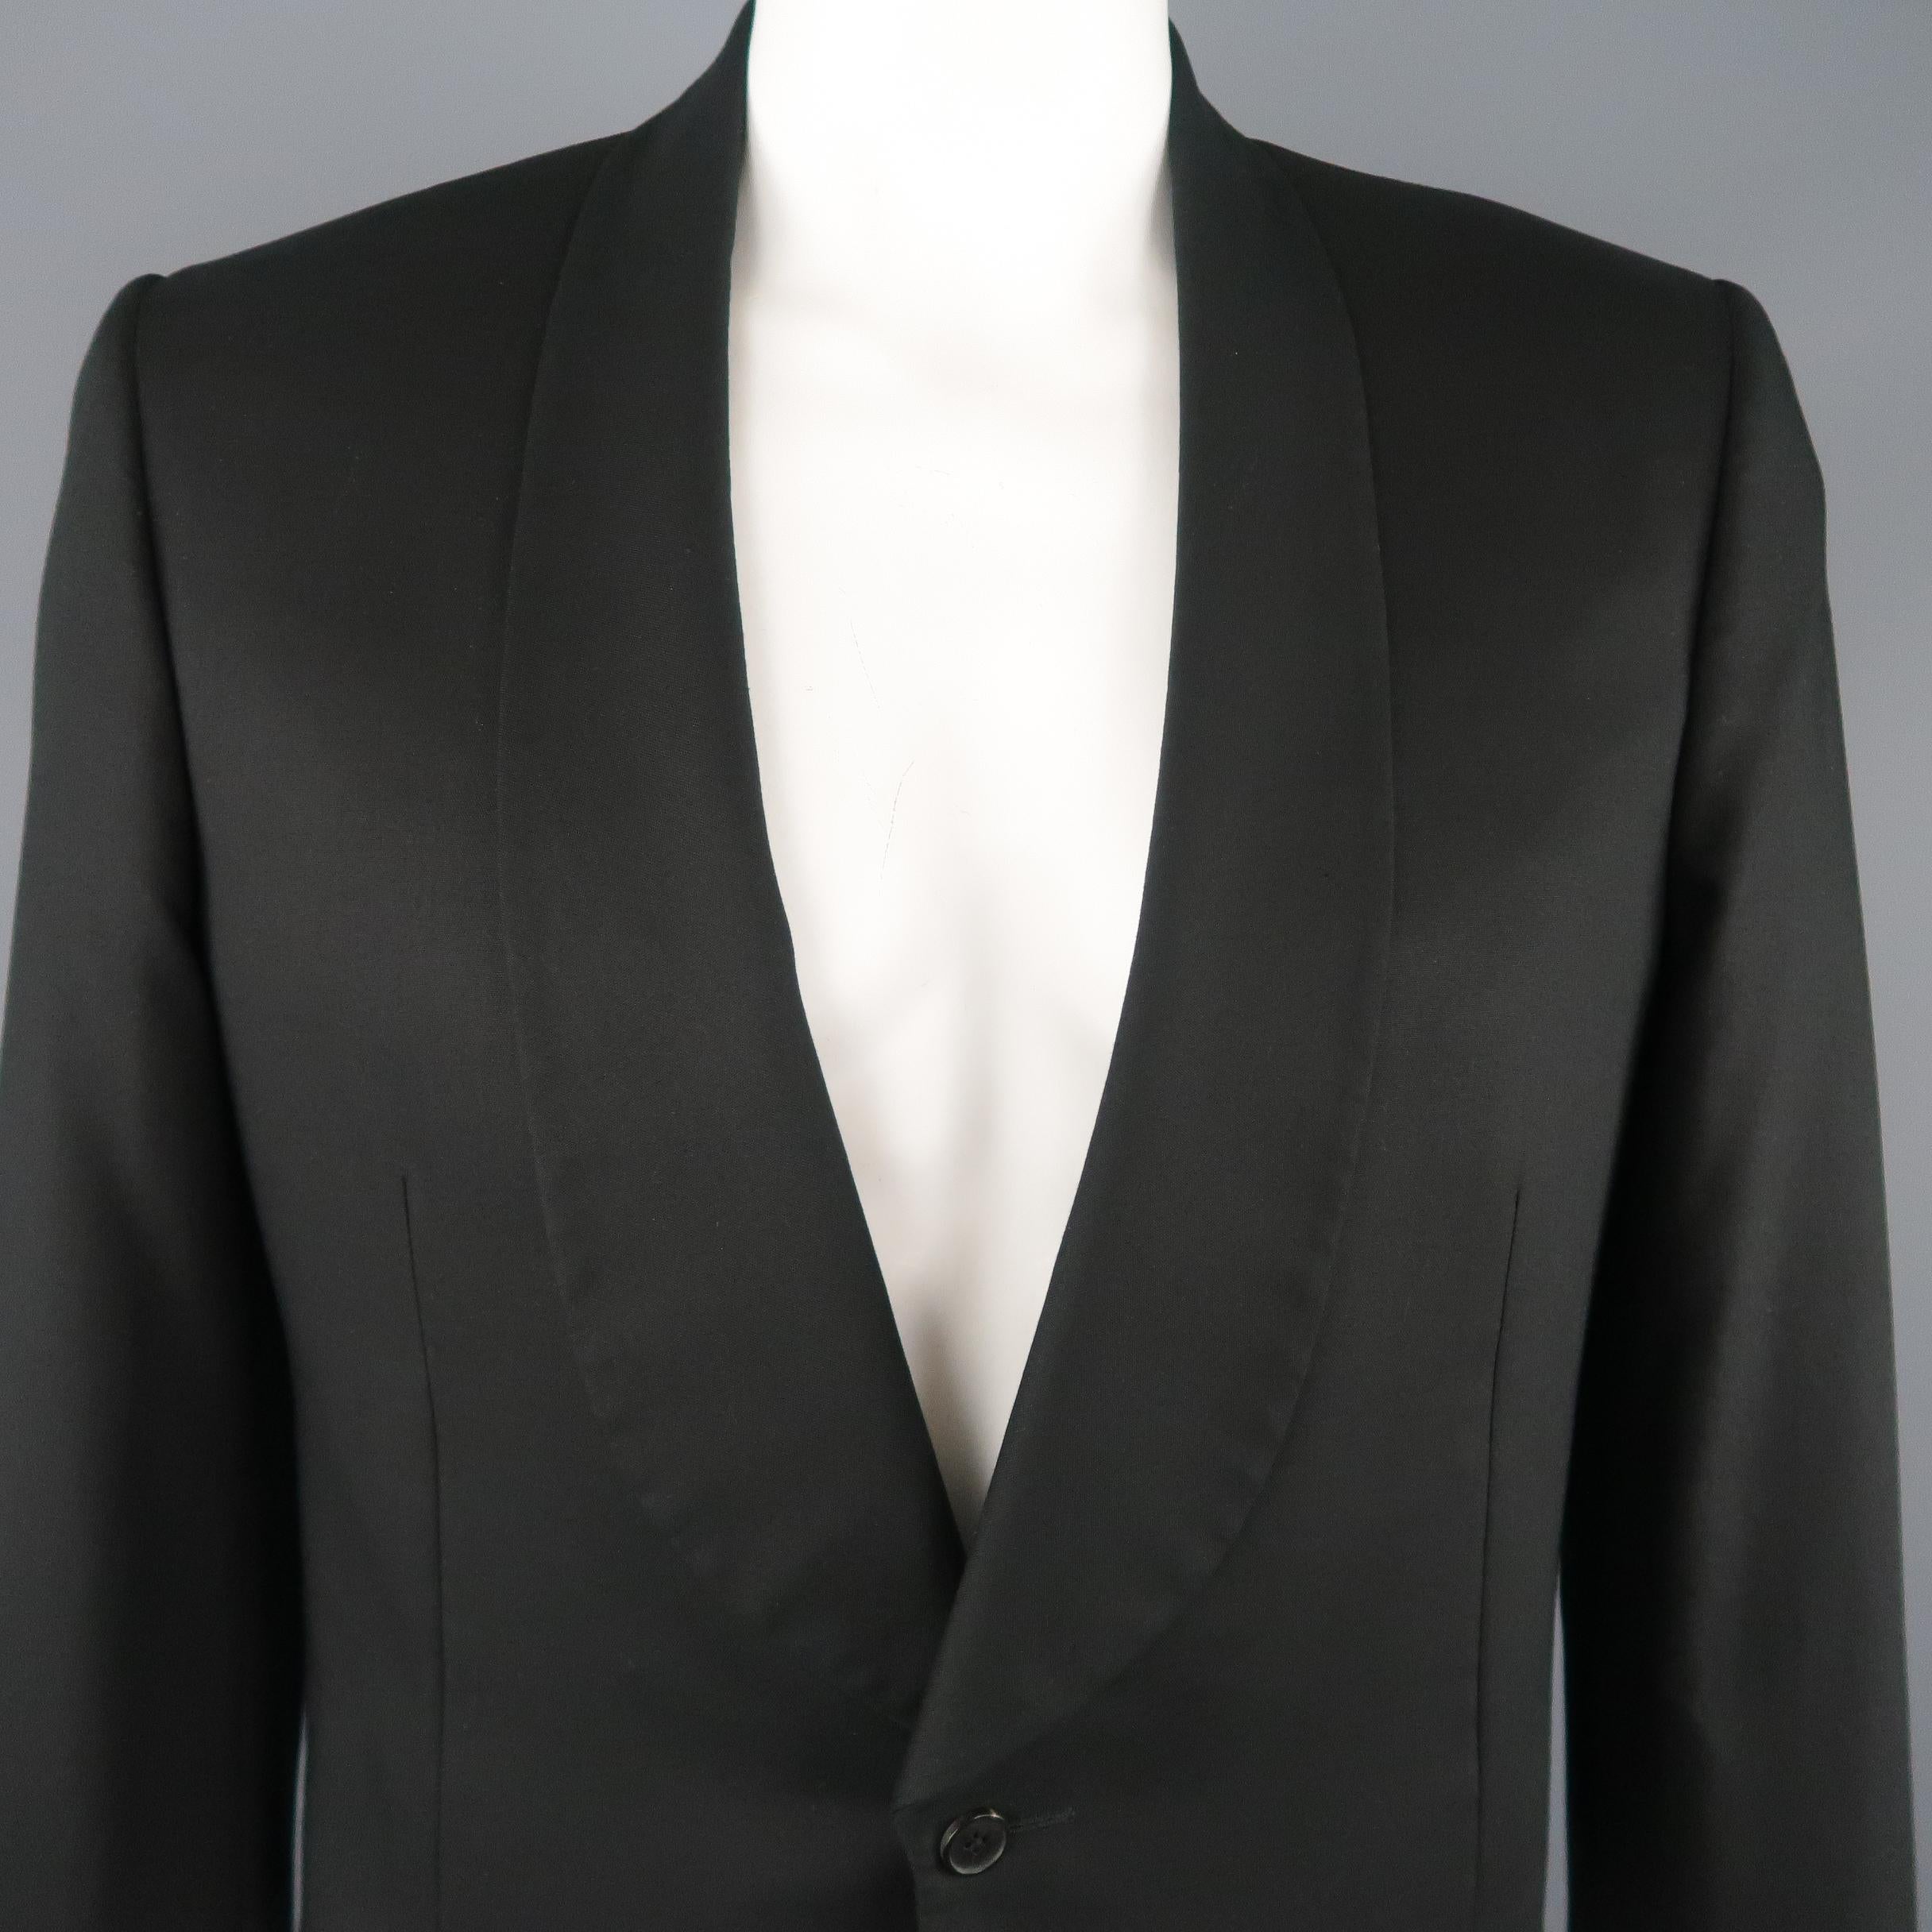 LOUIS VUITTON cropped dinner jacket comes in black wool with a shawl collar, cropped hem,, single button closure, and Damier twill liner. Made in Italy.
 
Excellent Pre-Owned Condition.
Marked: IT 54
 
Measurements:
 
Shoulder: 18 in.
Chest: 44